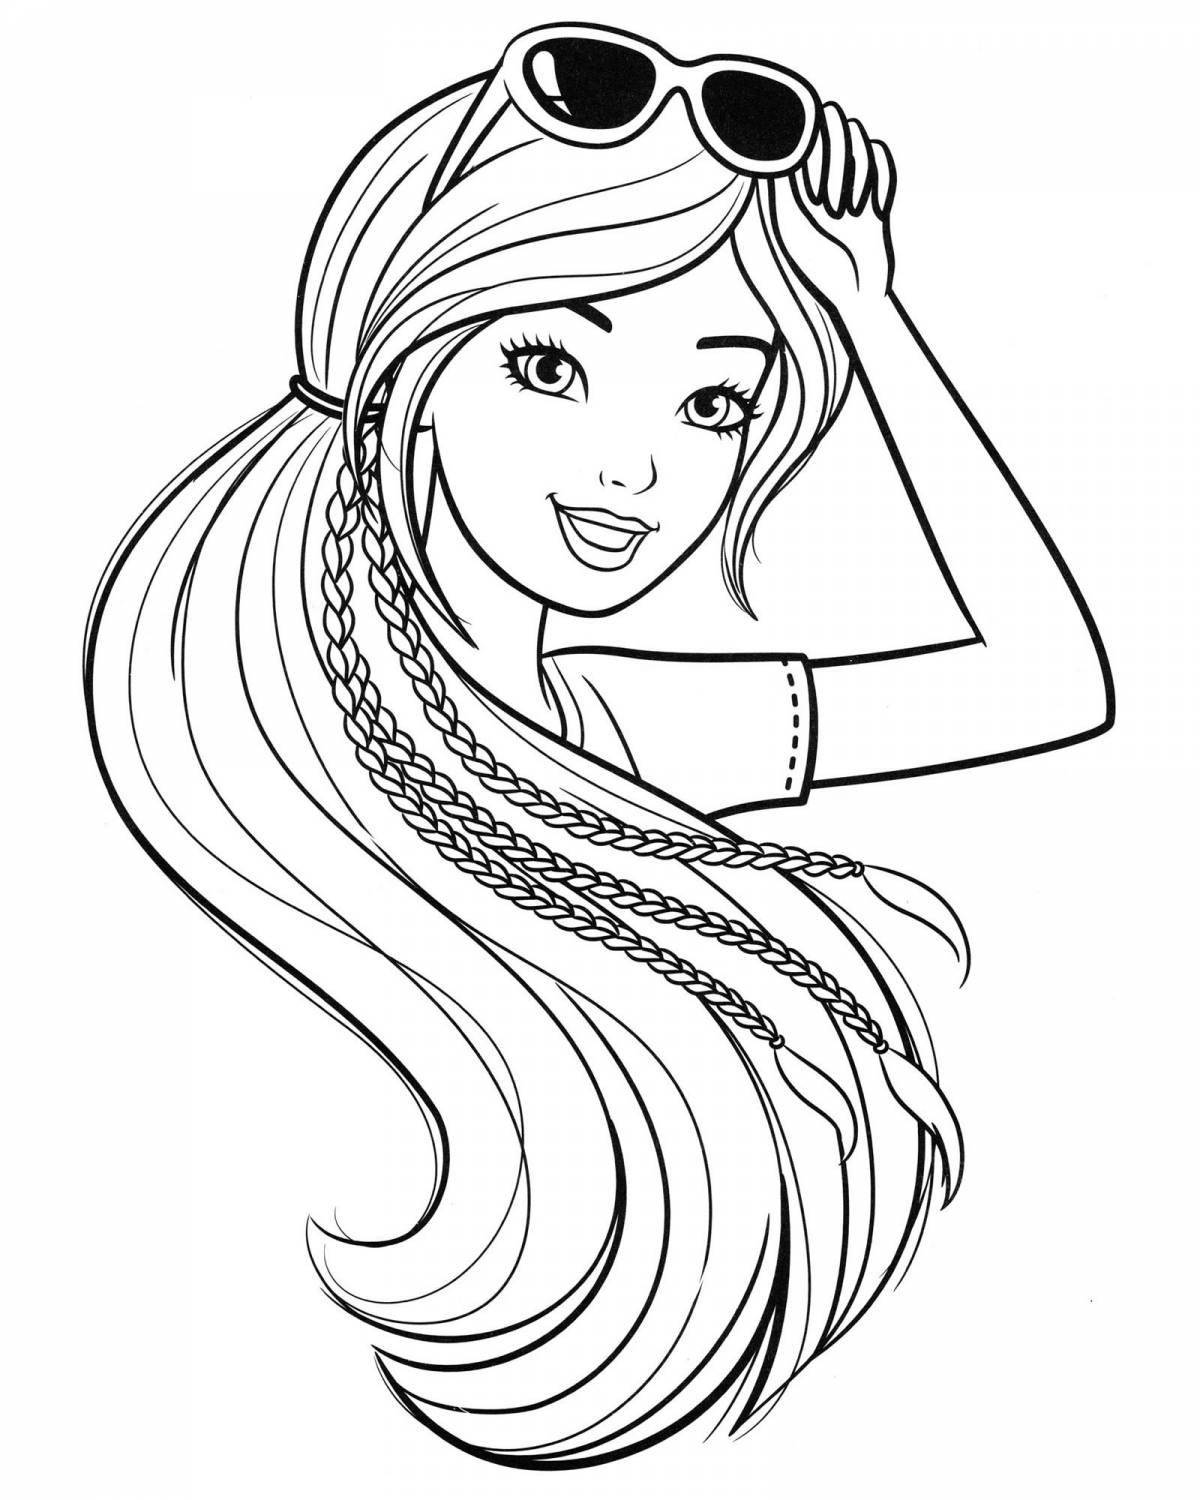 Coloring for girls